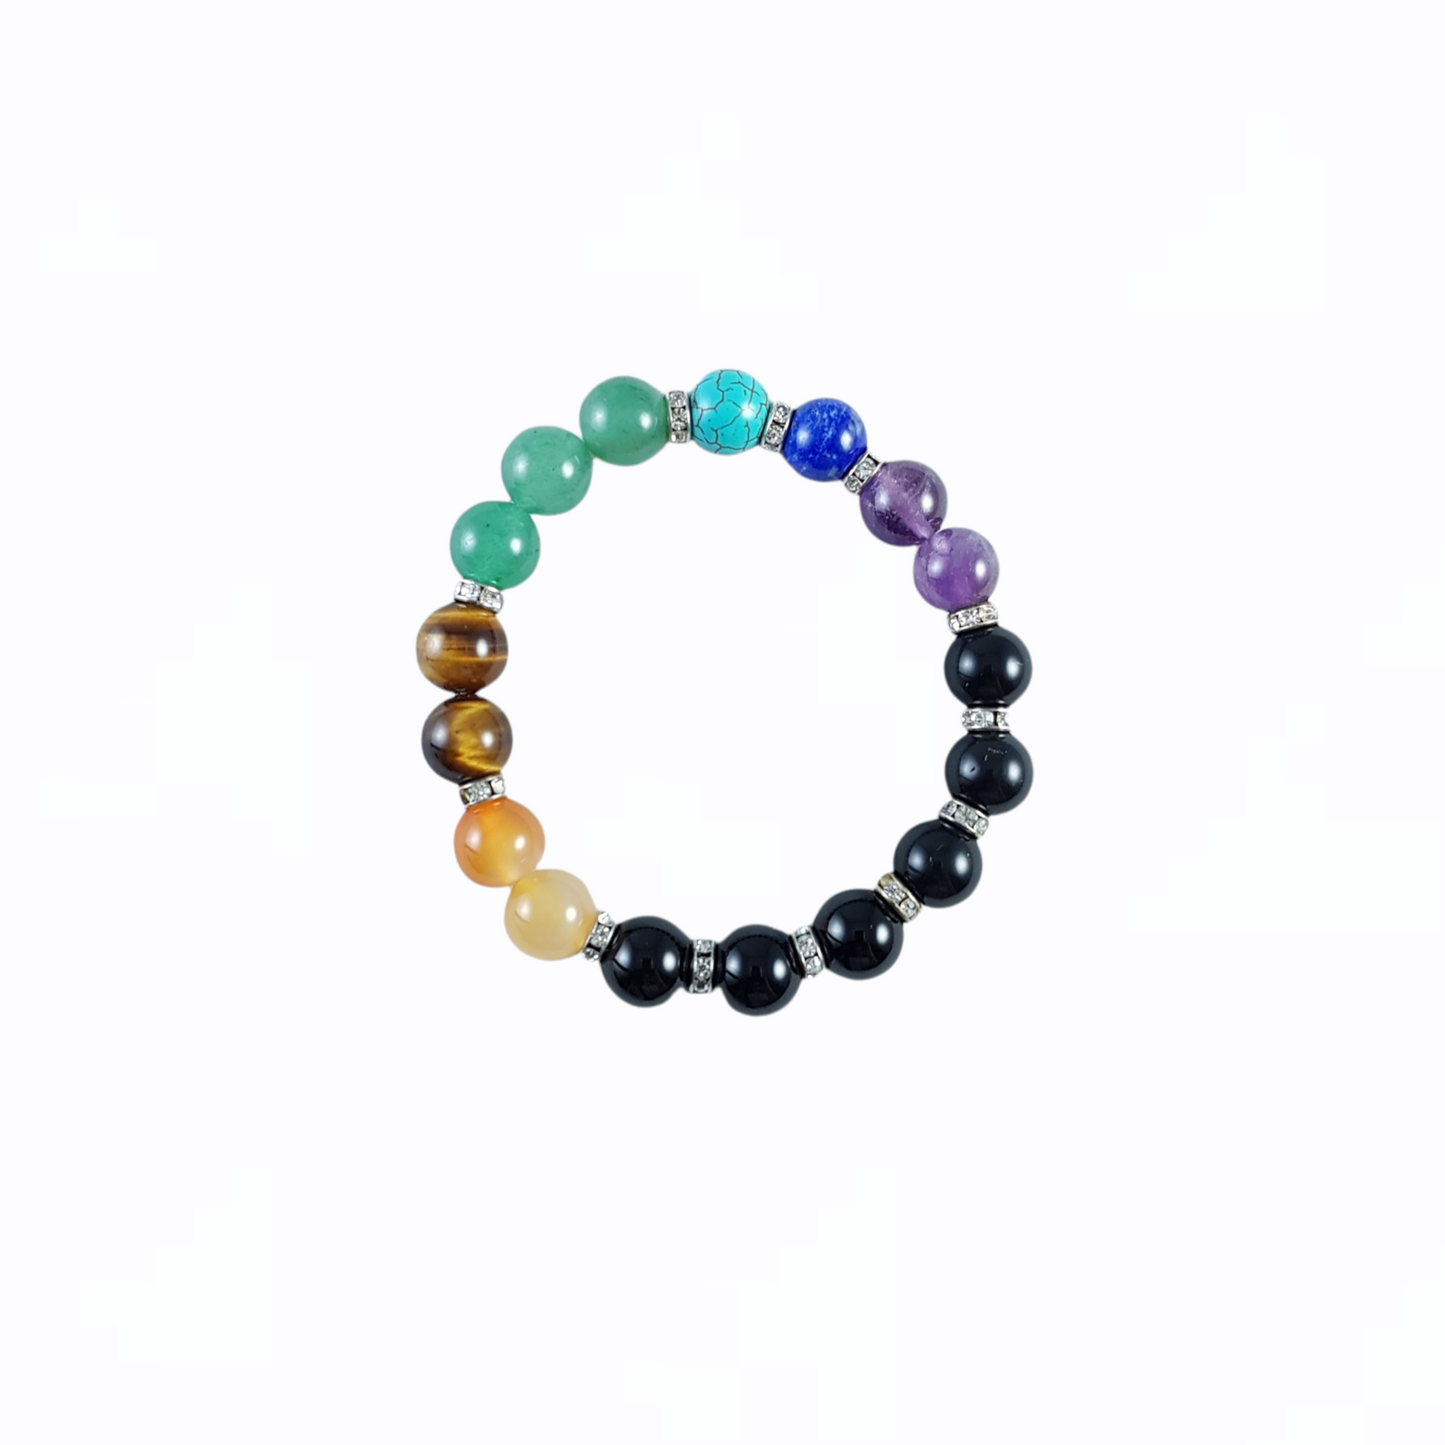 7 Chakra Mixed Crystal with Black Onyx and Bling spacer Bracelet